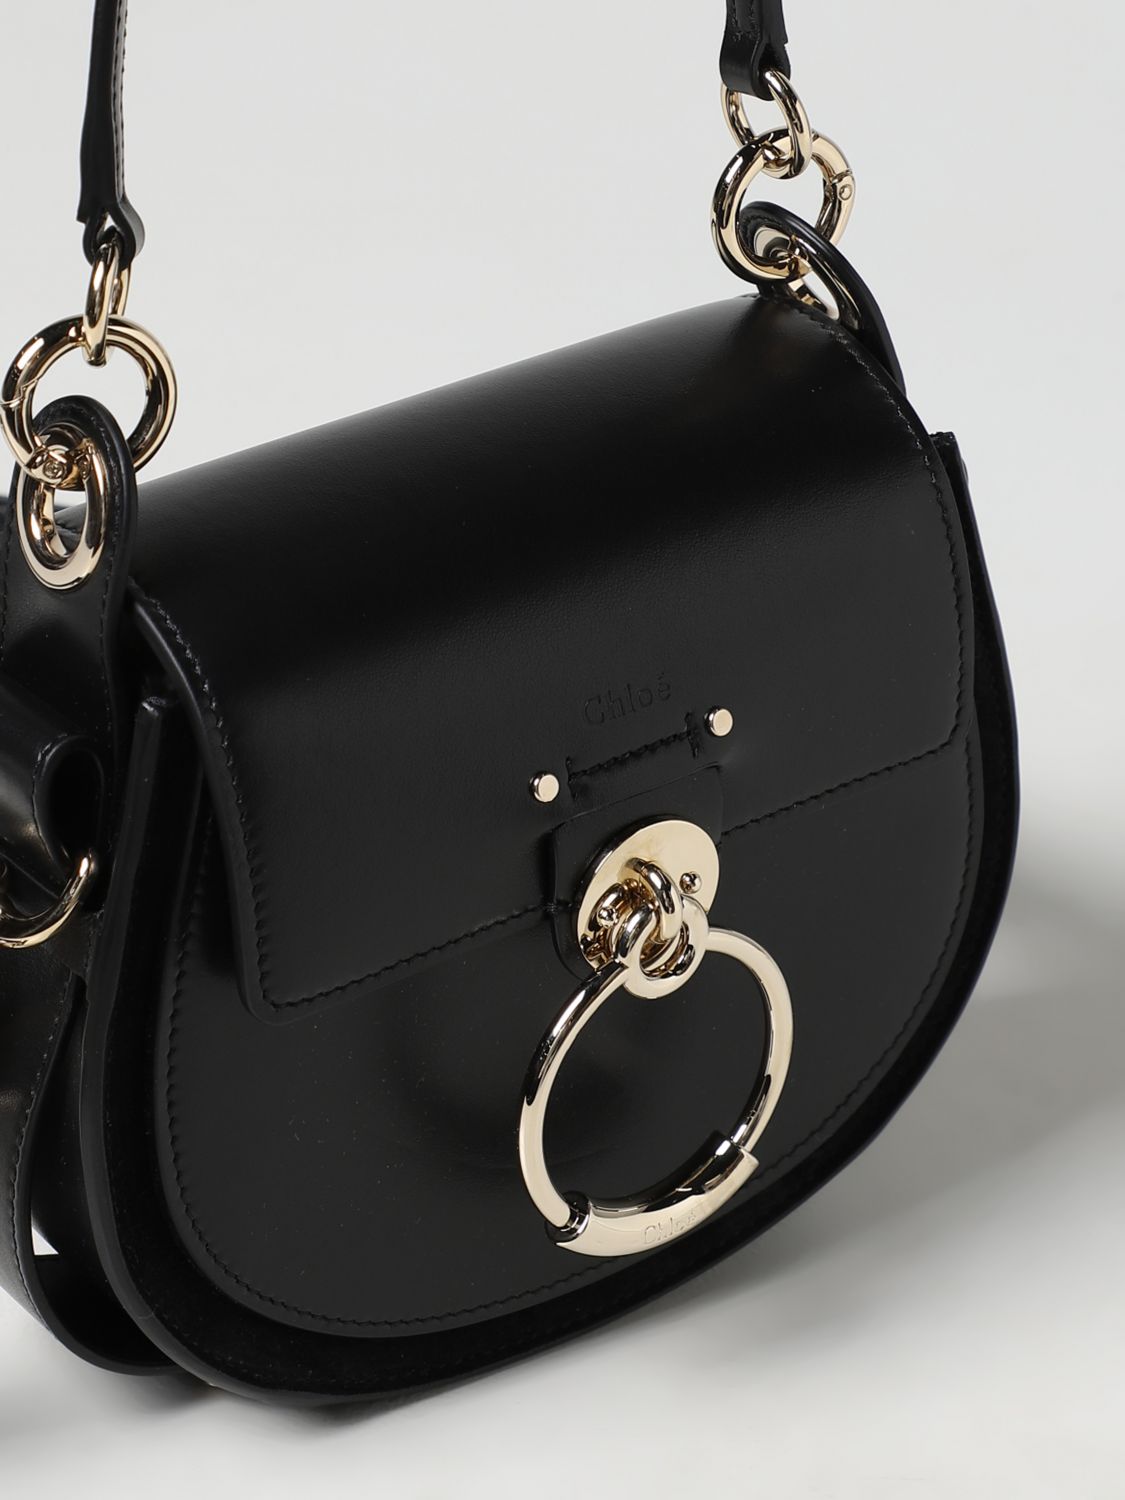 Chloé: Tess Bag In Smooth And Suede Leather - Black | Chloé Mini Bag  C22Ss153G31 Online On Giglio.Com